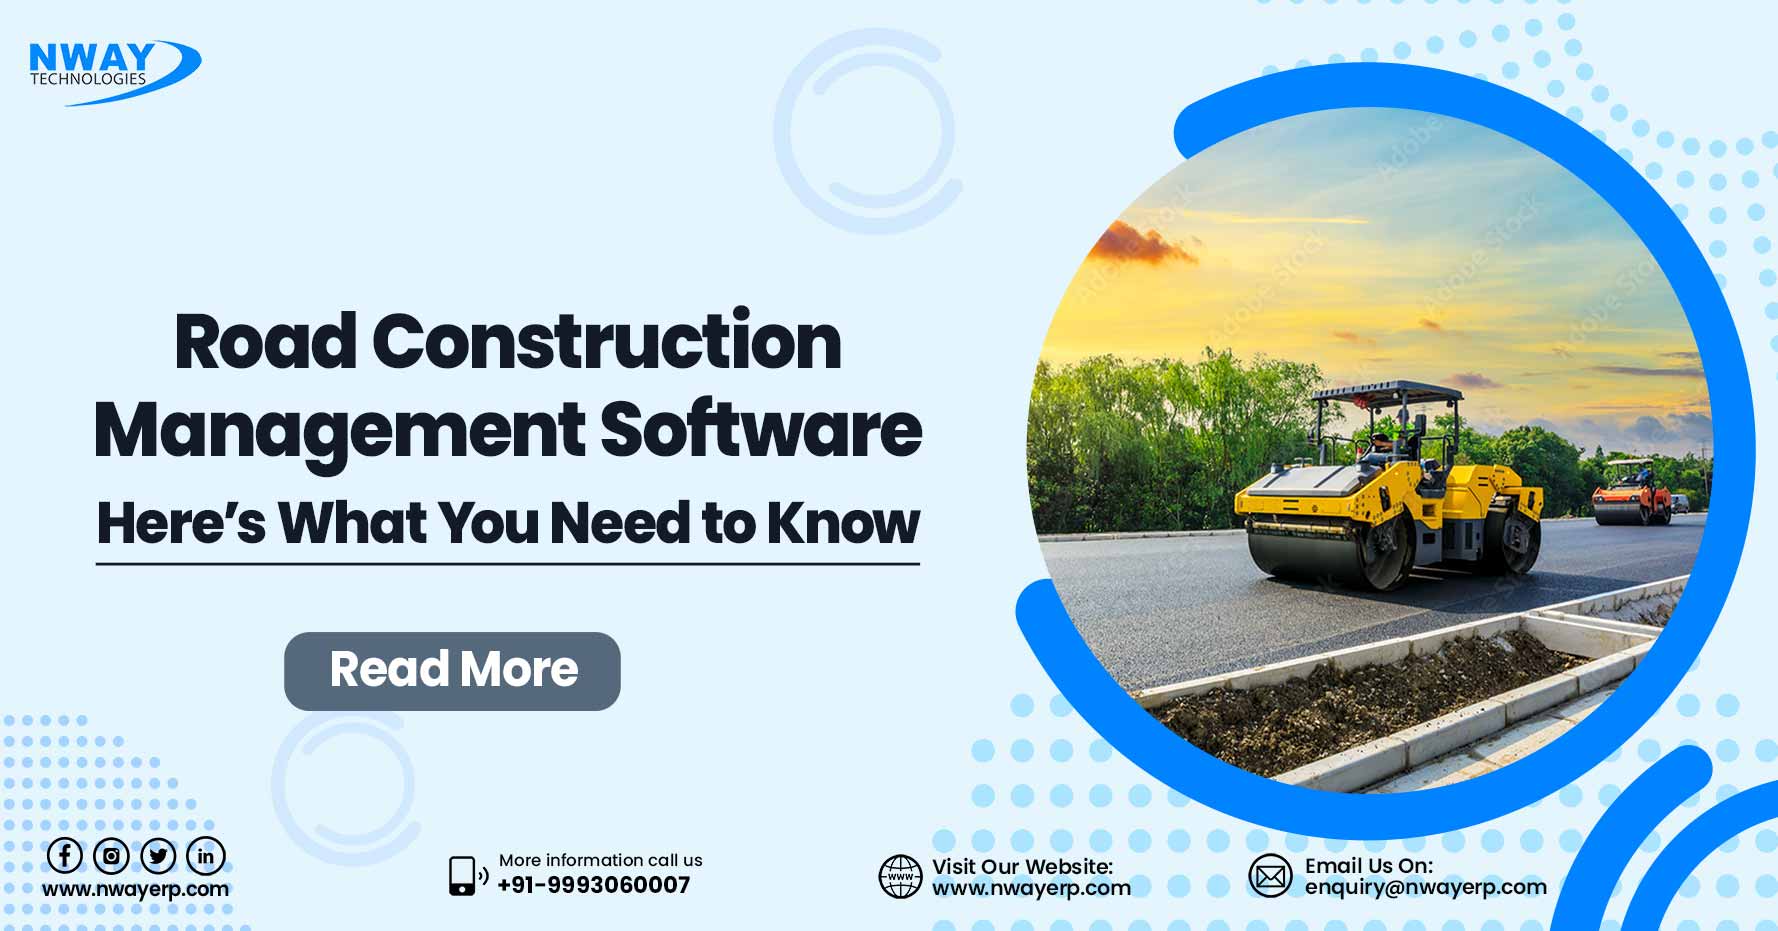 Road Construction Management Software - Here’s What You Need to Know